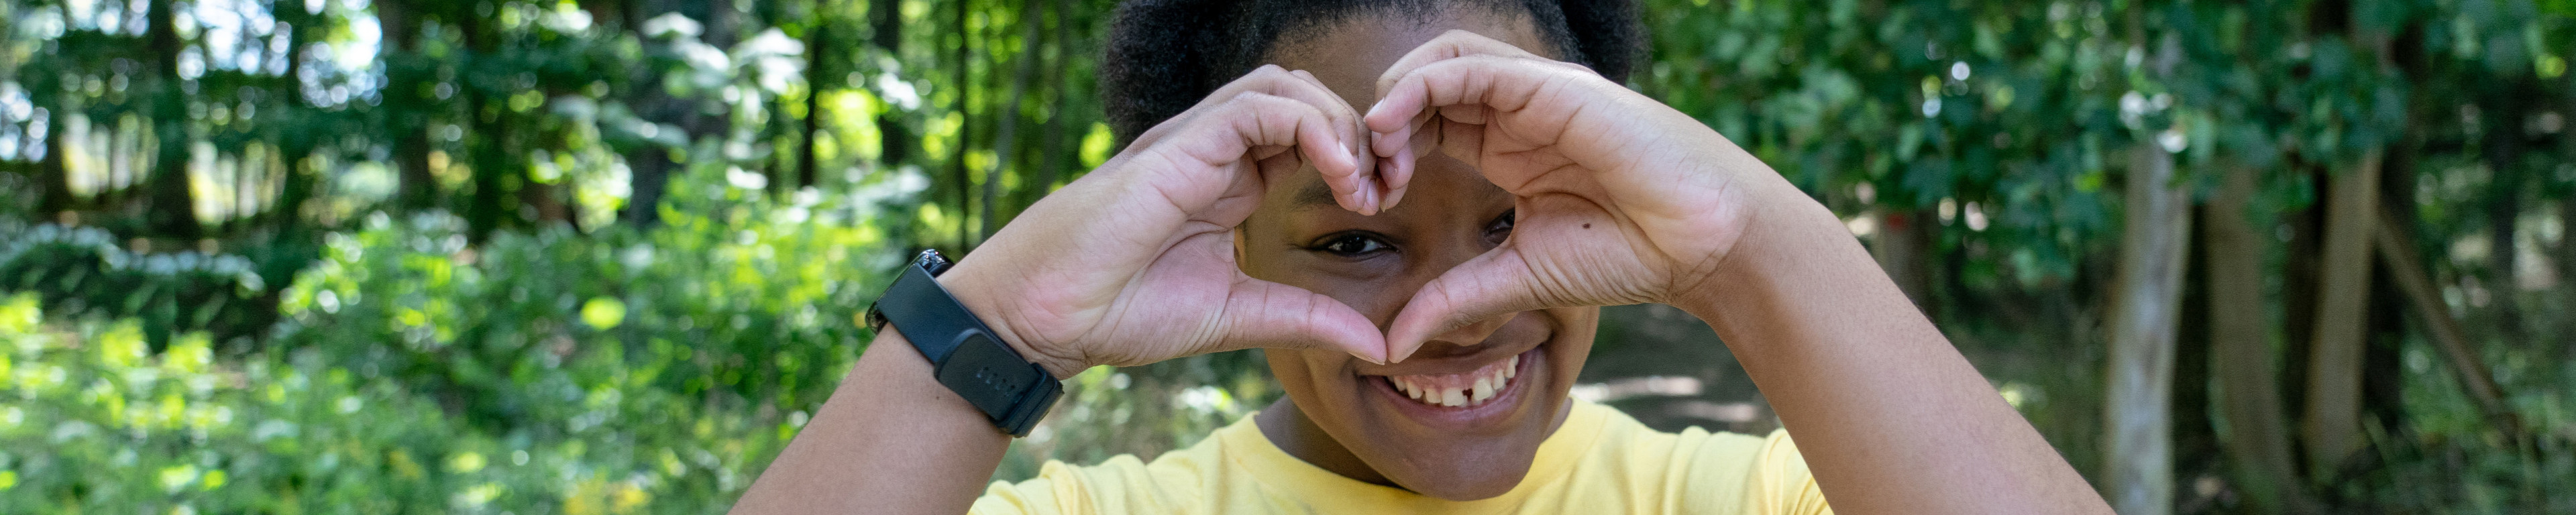 A student forms a heart with her hands in front of her face.